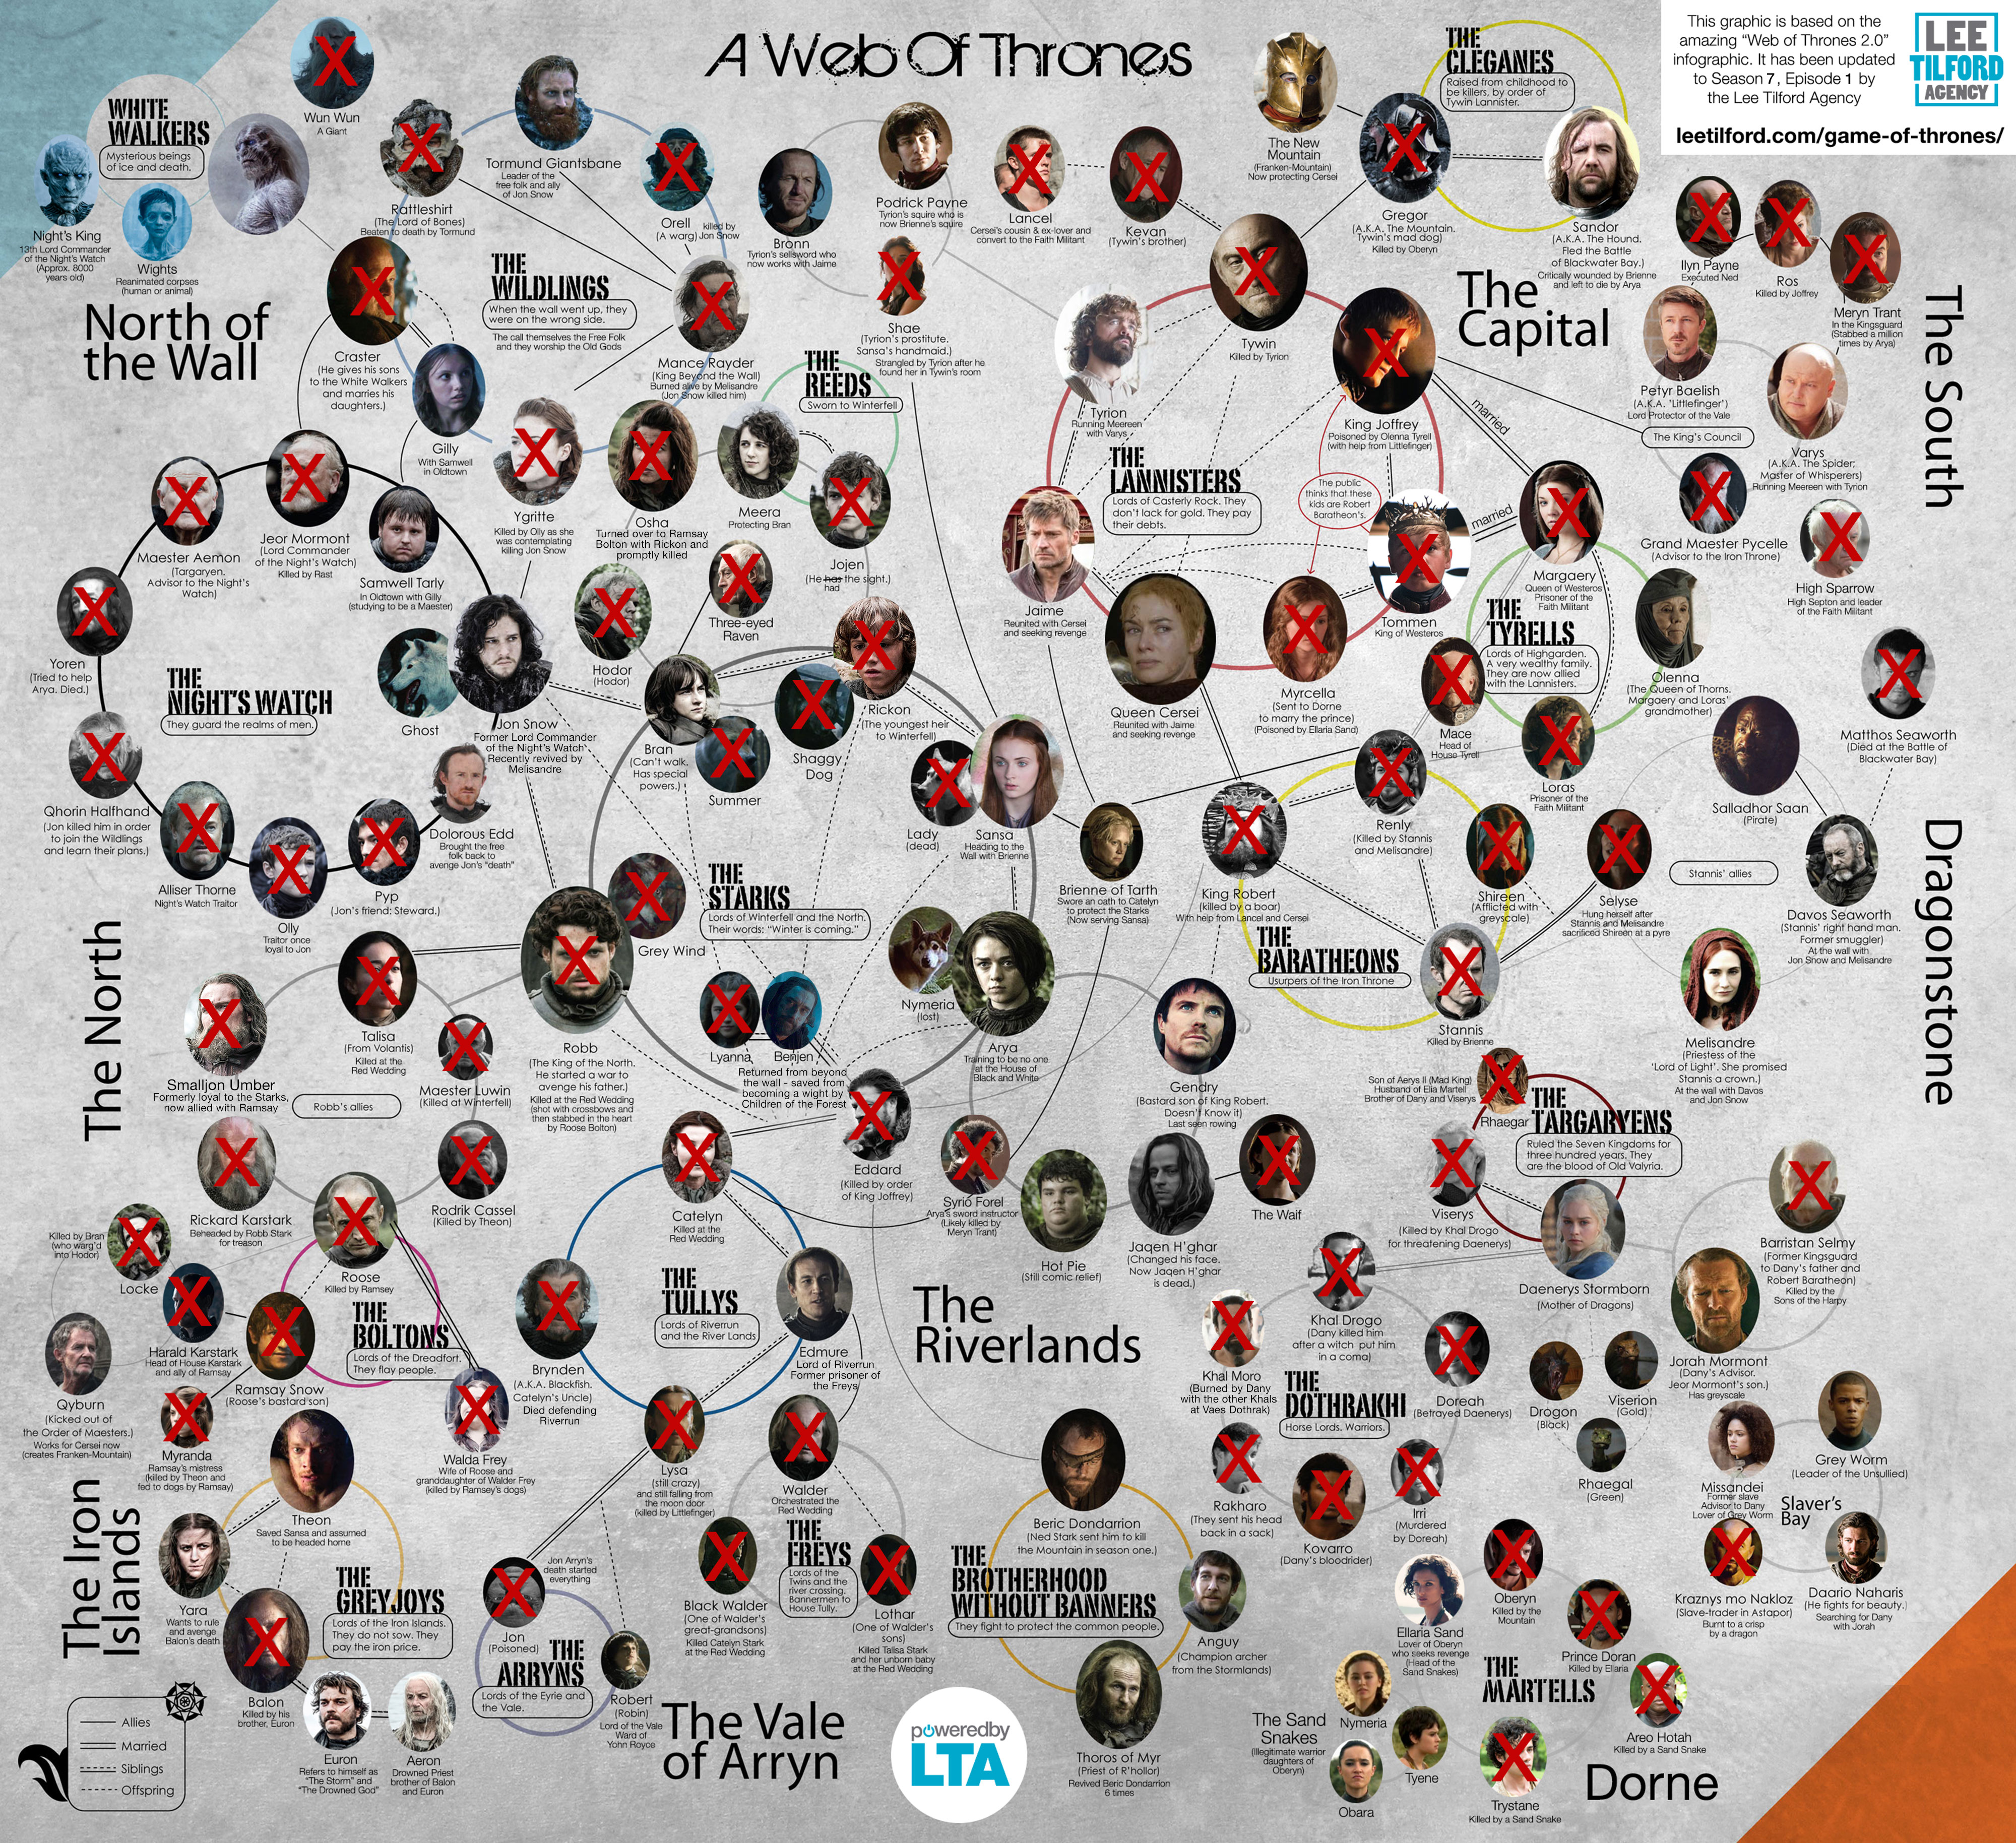 Web Of Thrones Game Of Thrones Character Map Spoilers